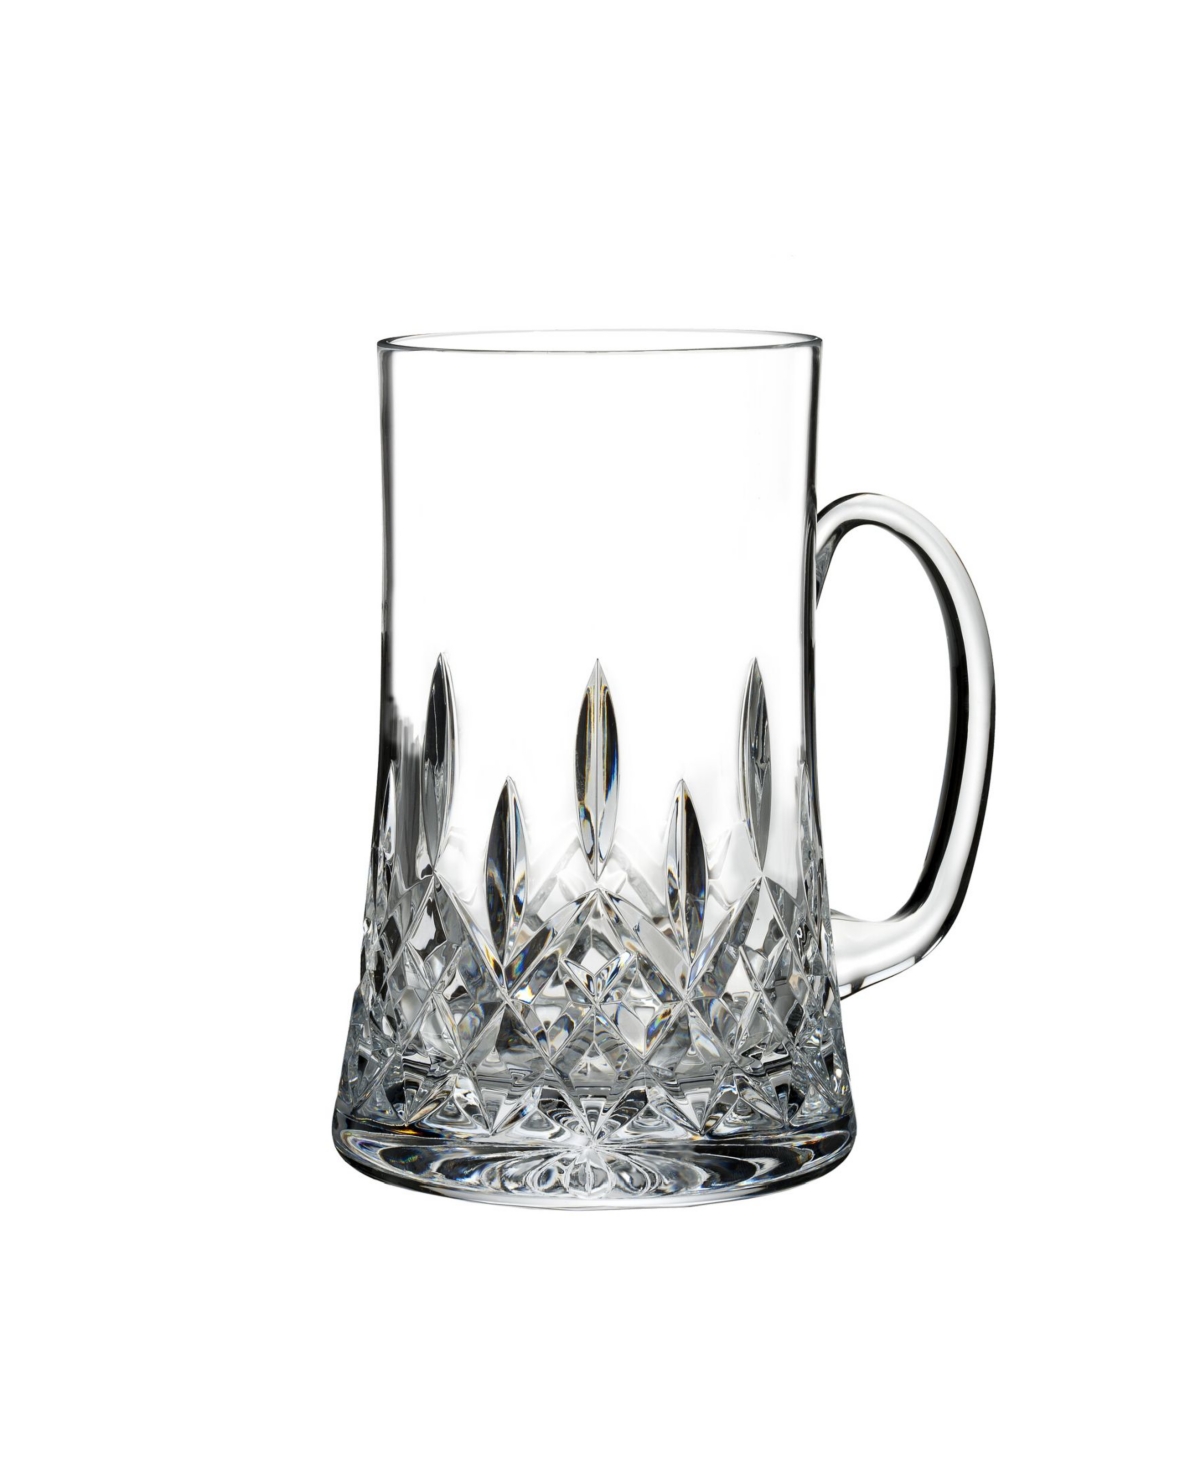 Waterford Lismore Connoisseur Beer Mug, 18oz In Clear